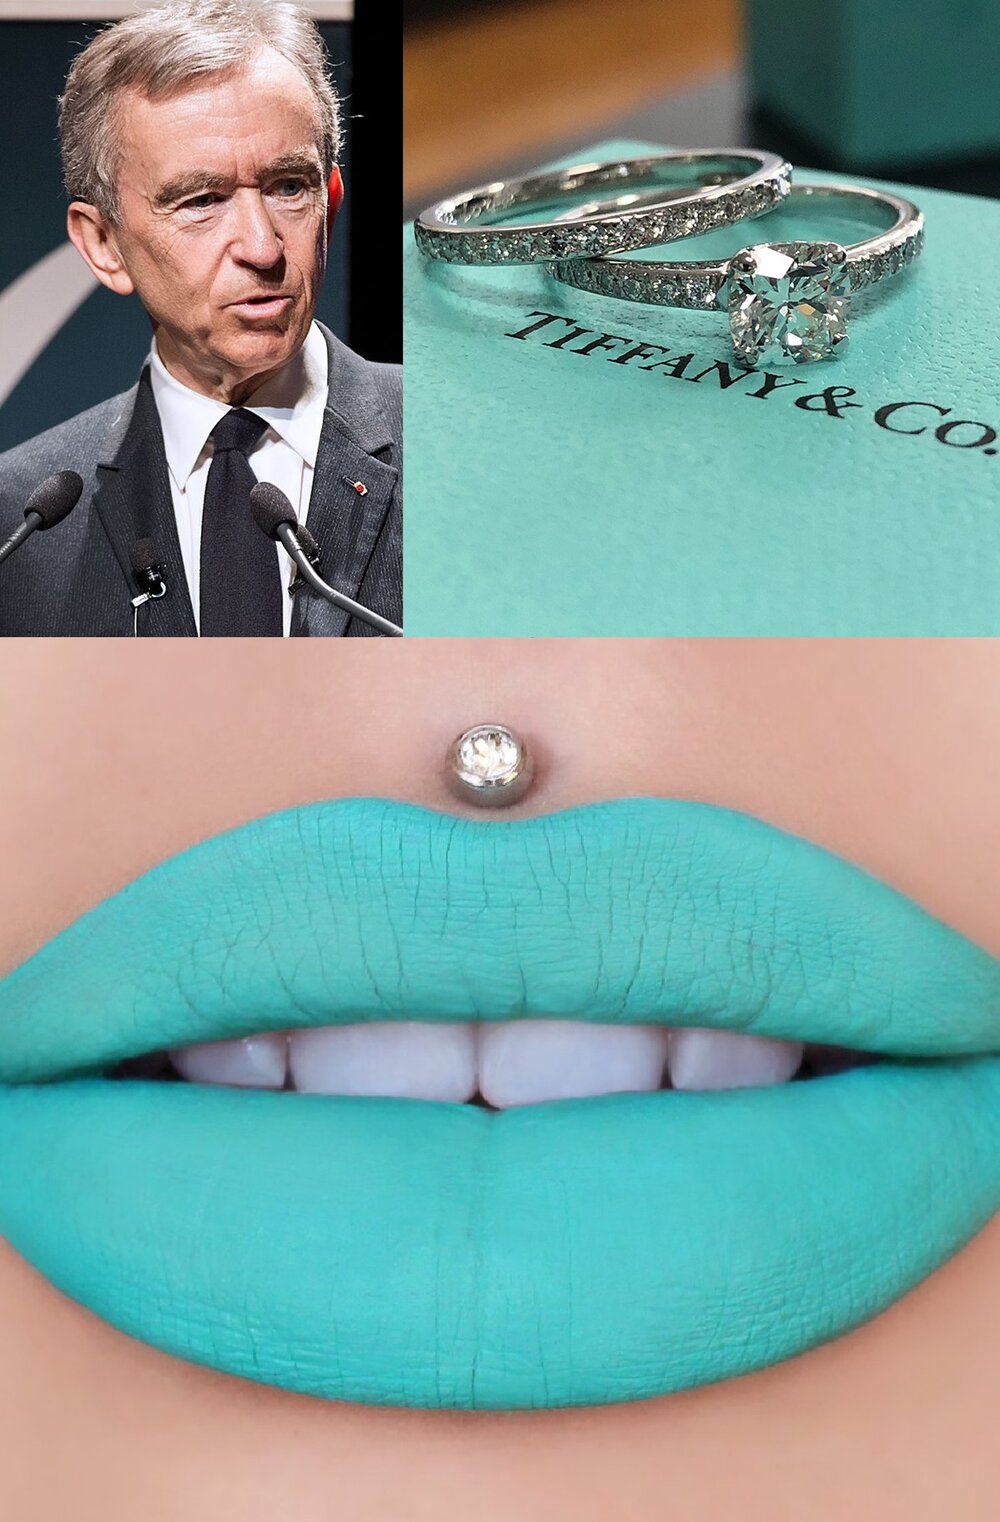 LVMH Withdraws From Tiffany & Co. Acquisition